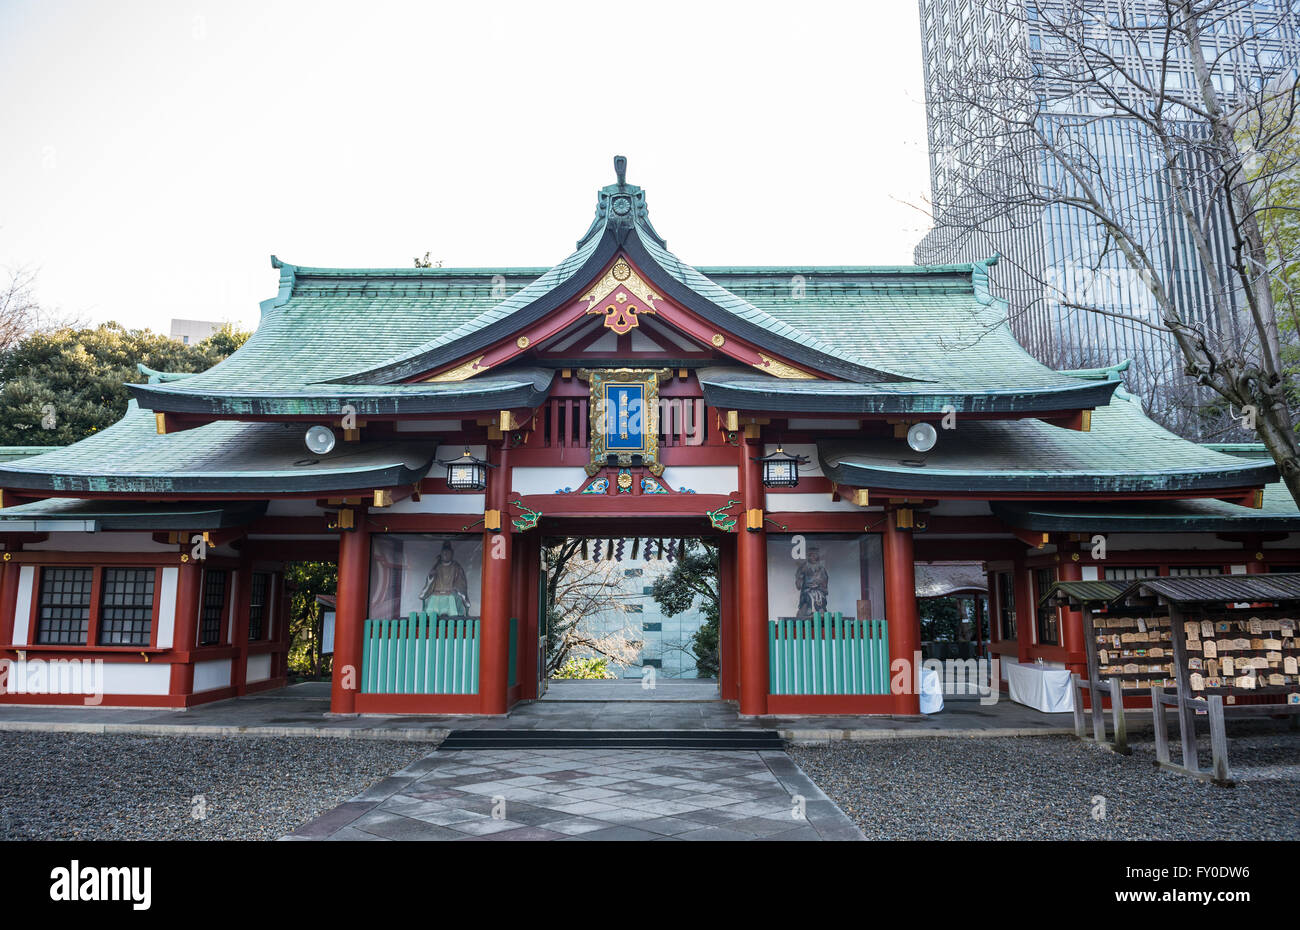 main building in Shinto Hie Shrine in Nagatacho district, Chiyoda special ward of Tokyo, Japan Stock Photo